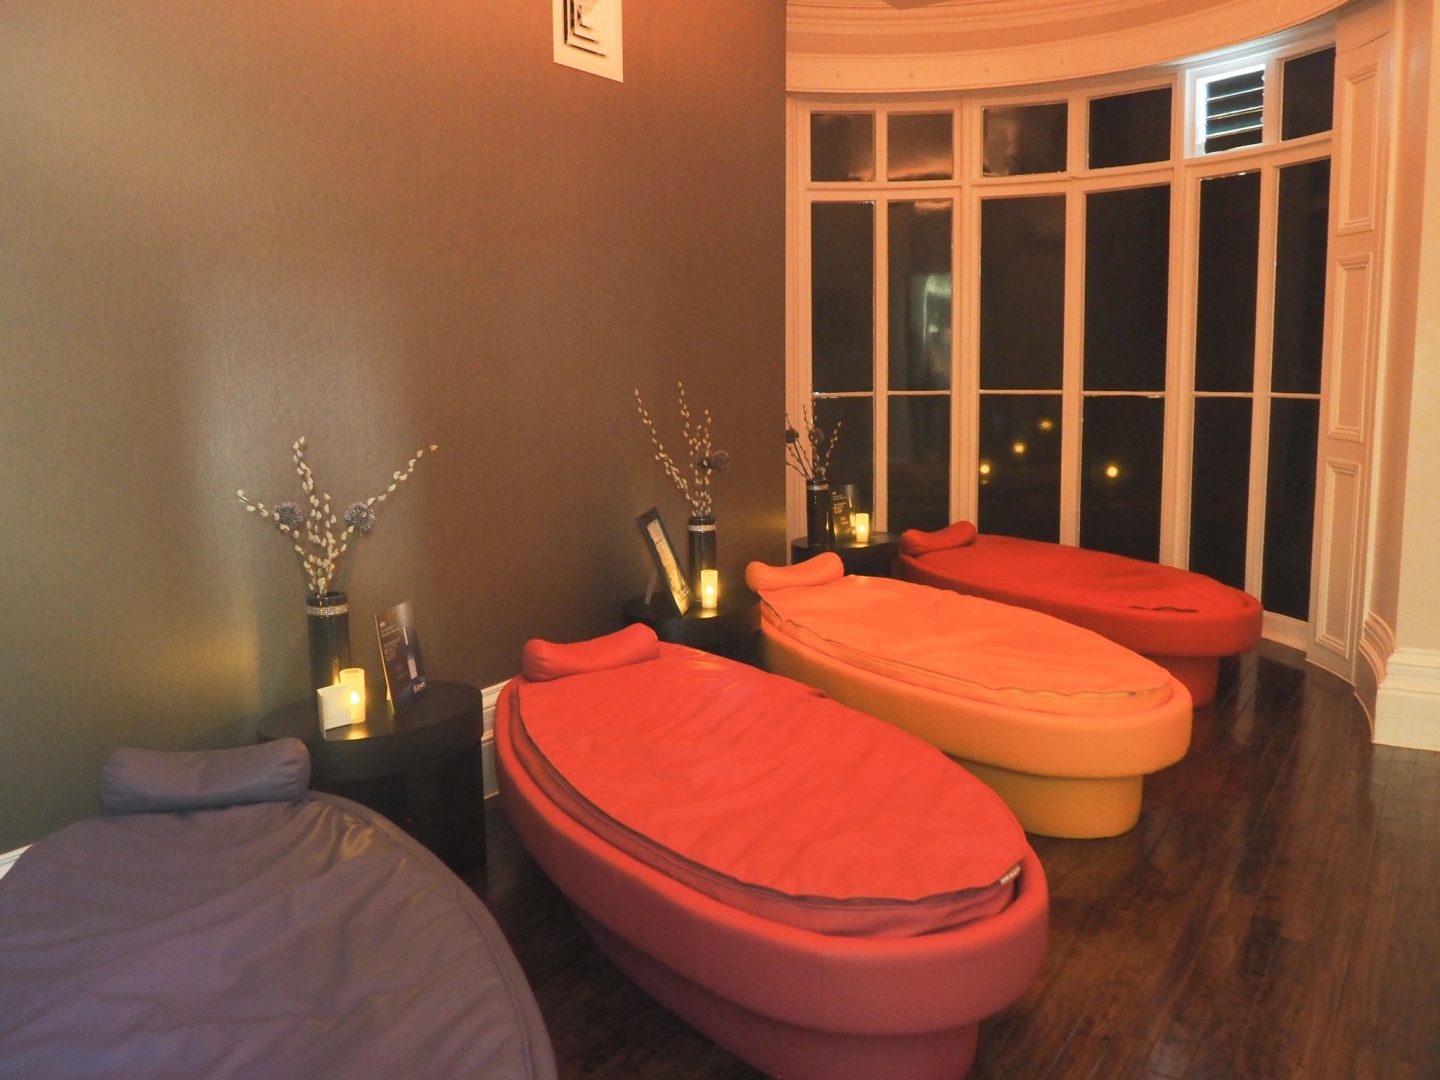 Kingsford Park Spa heated water beds